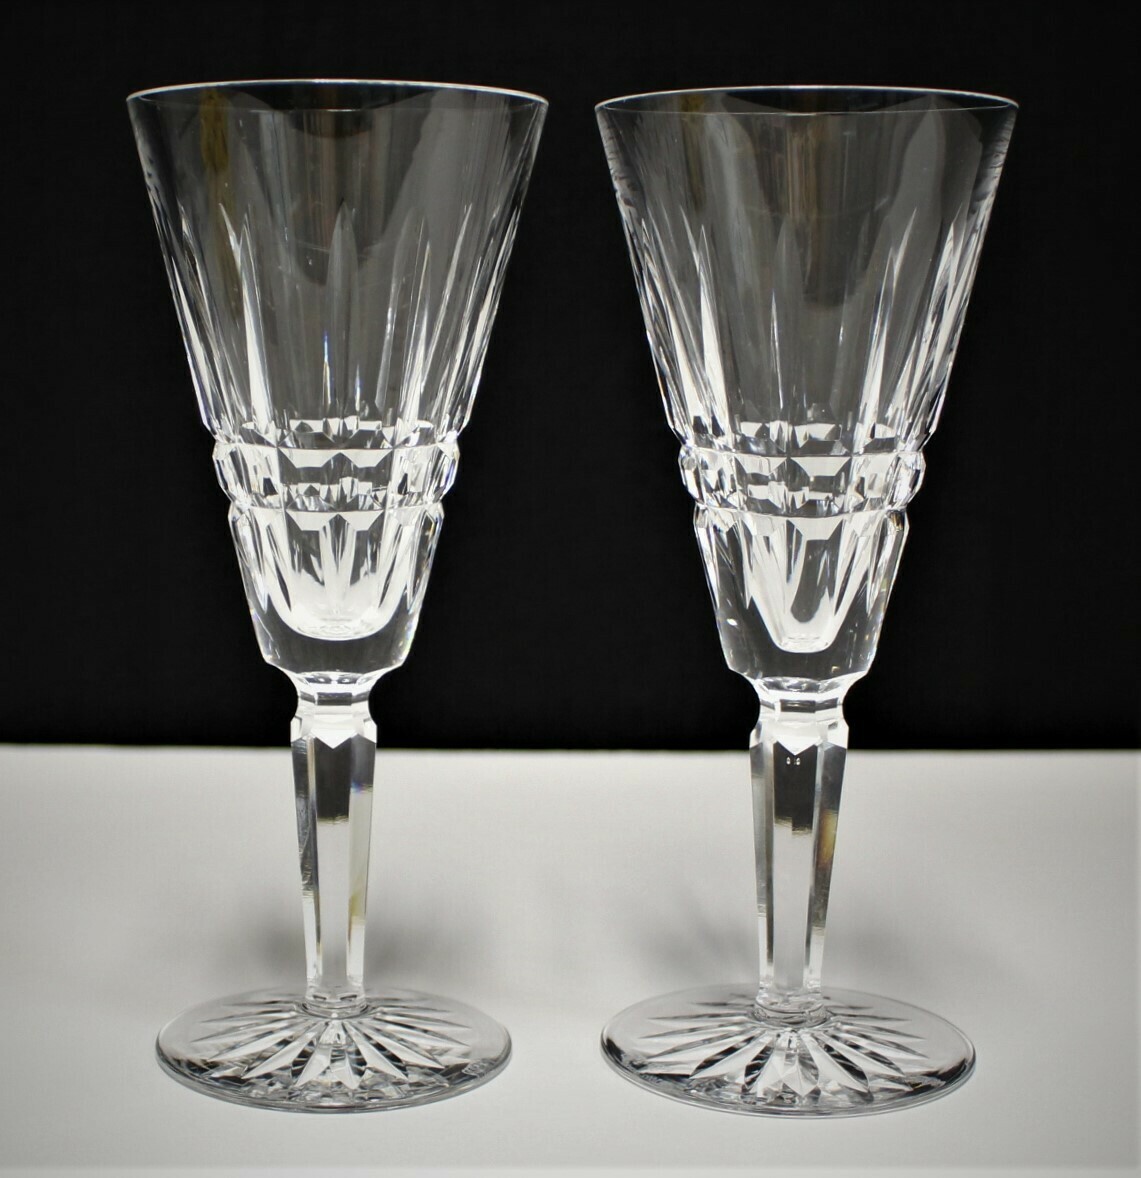 Set of 2 Waterford Crystal Glenmore Pattern 7 1/8” Champagne Flutes Glassware